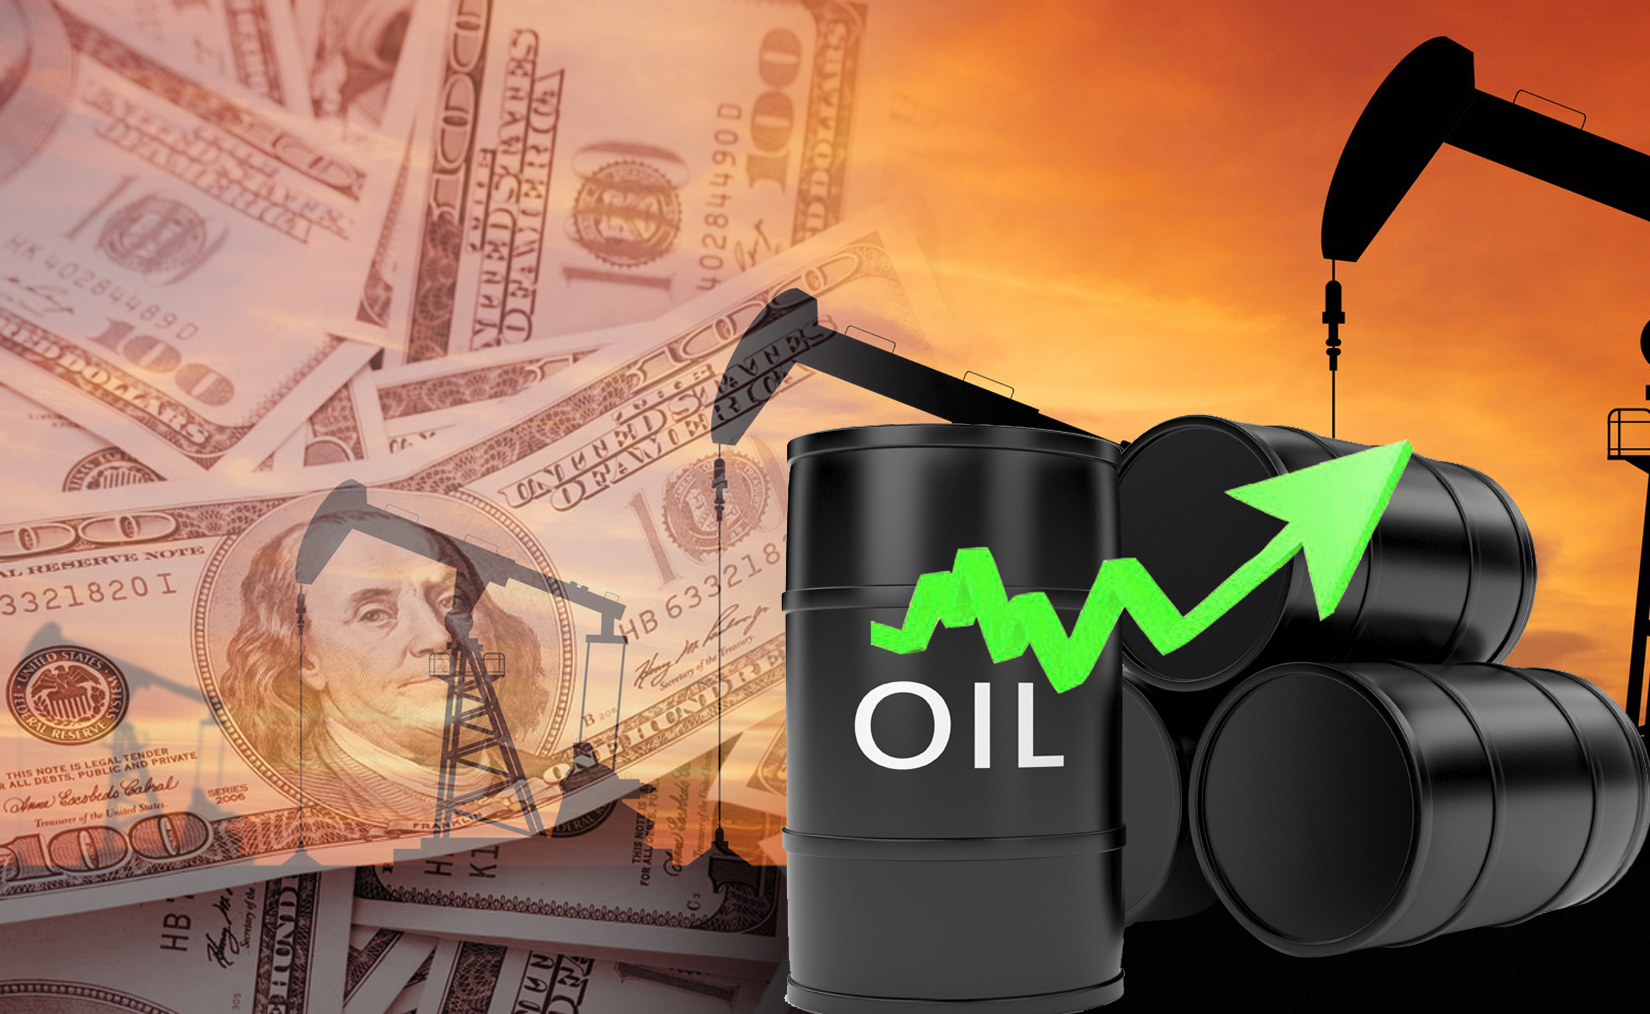 Kuwait oil price up one cent to USD 63.31 pb                                                                                                                                                                                                              